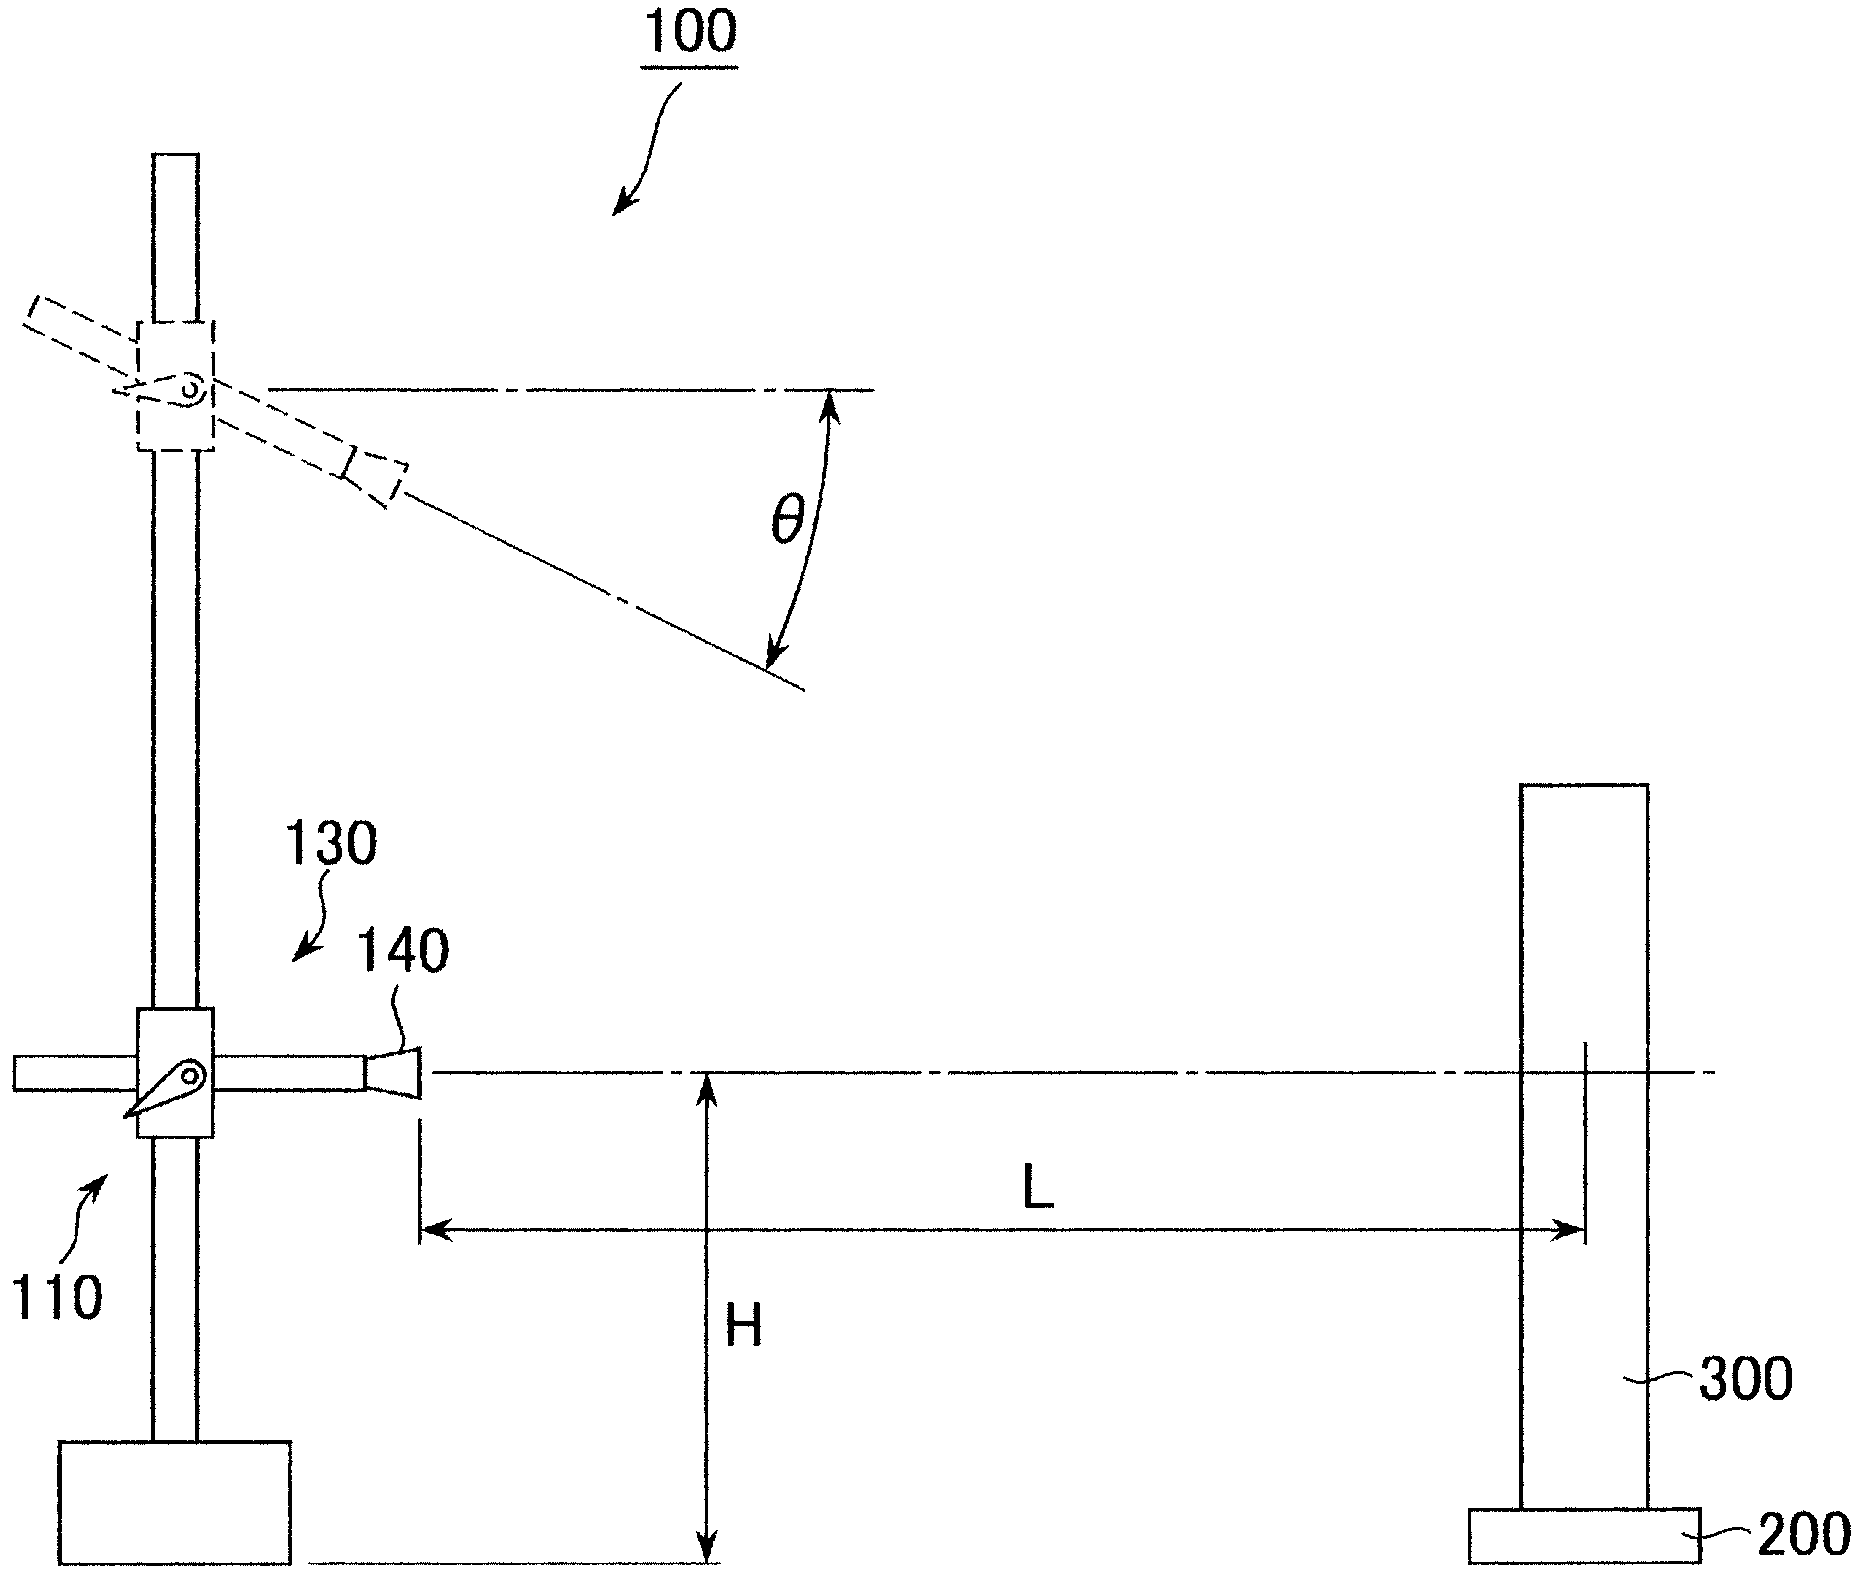 Antenna lifting device and electromagnetic wave measuring system